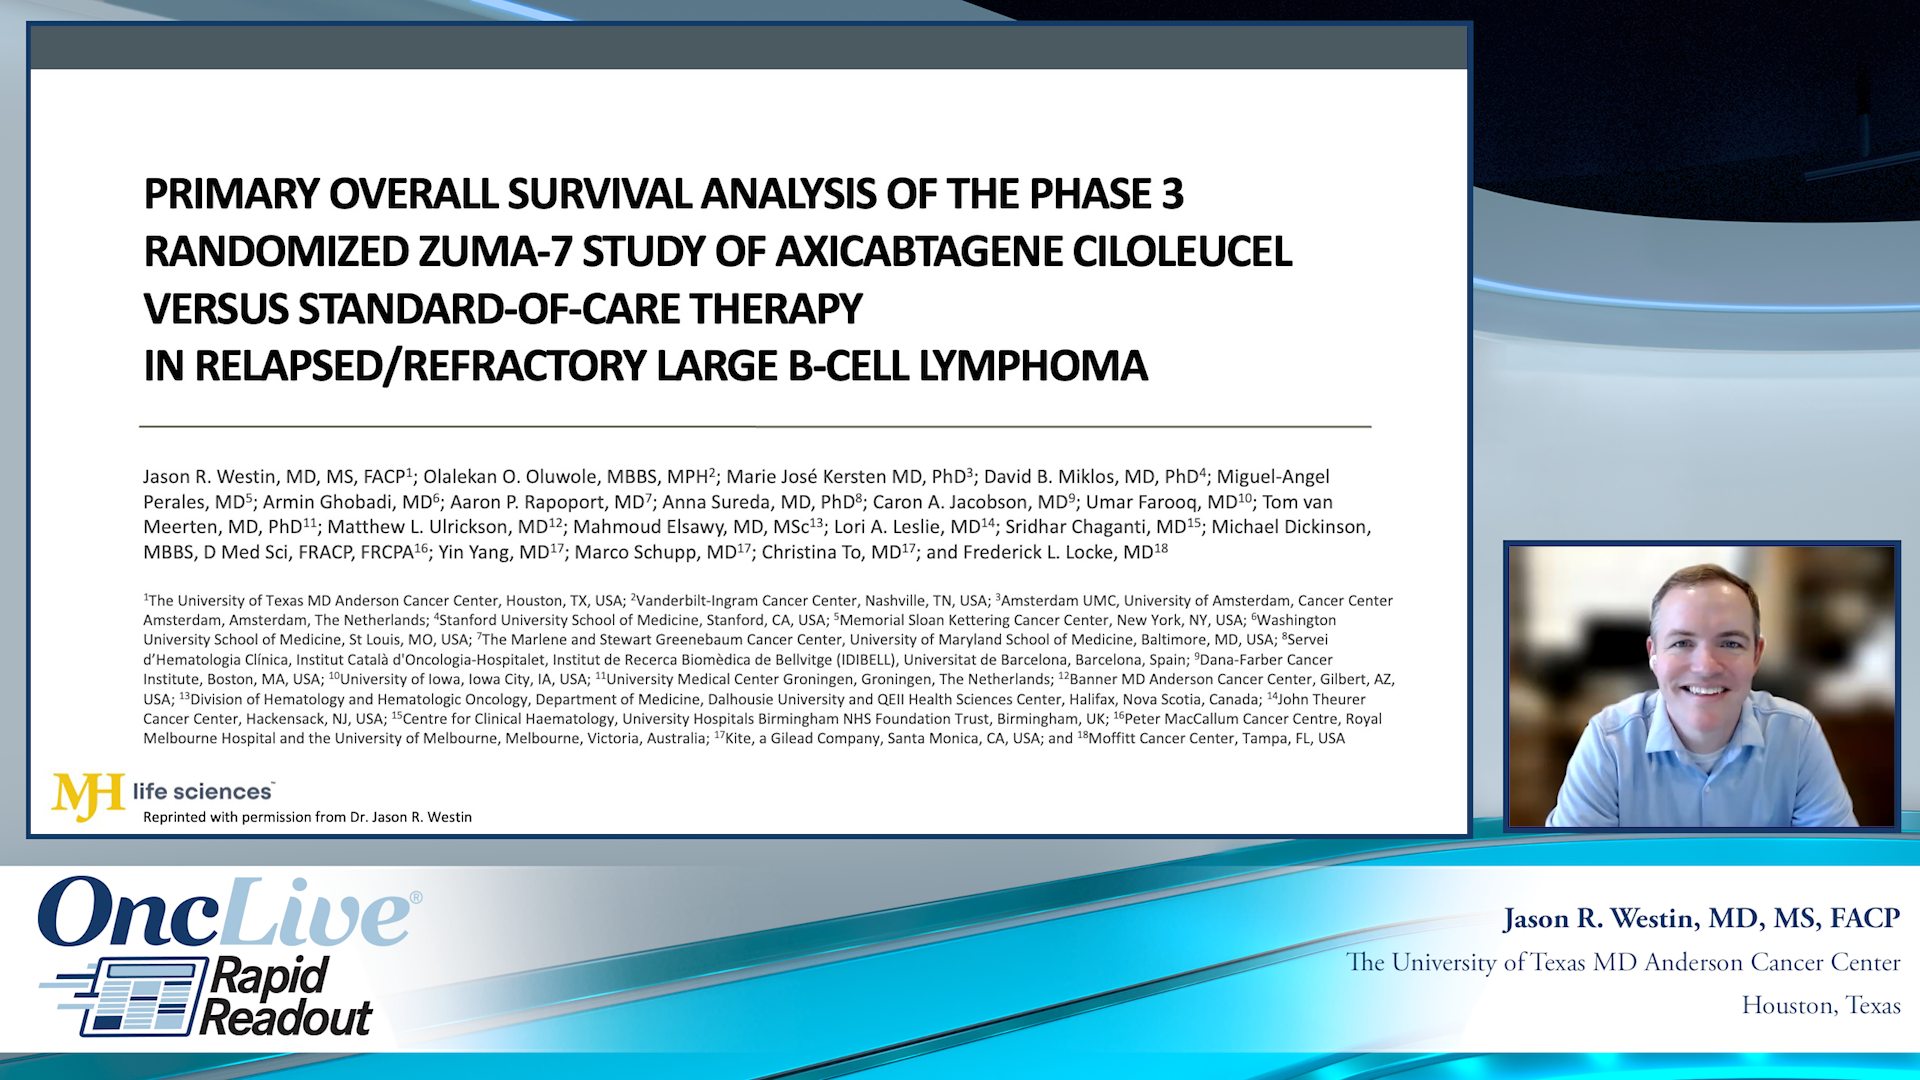 Primary Overall Survival Analysis of the Phase 3 Randomized ZUMA‑7 Study of Axicabtagene Ciloleucel Versus Standard-of-Care Therapy in Relapsed/Refractory Large B-Cell Lymphoma